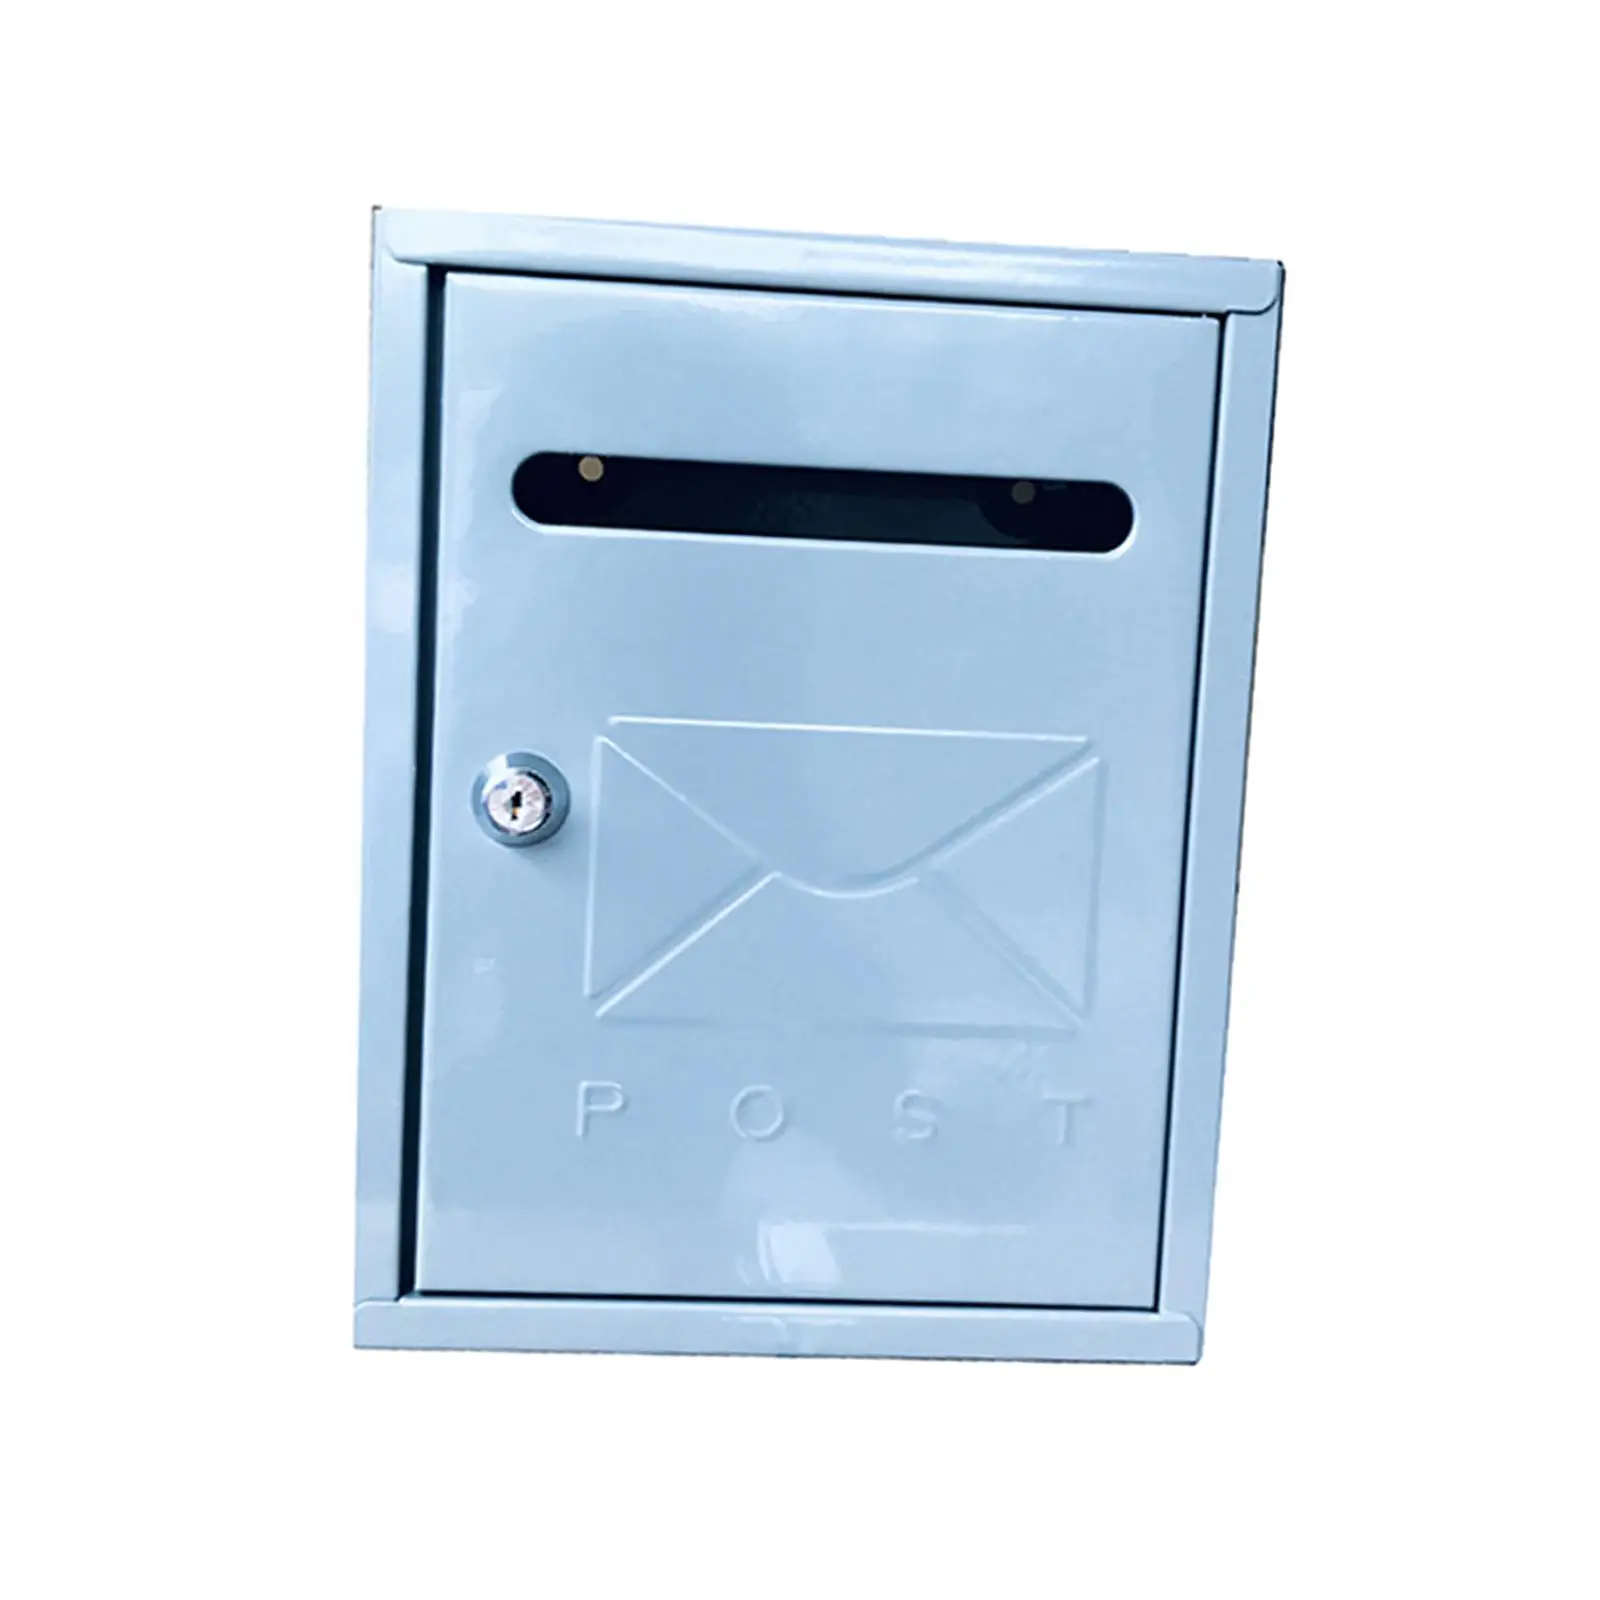 Locking Wall Mailbox Outdoor Mail Box Multifunctional Rust Resistant 21.7x30x7cm for Commercial Rural Home Scratch Resistant